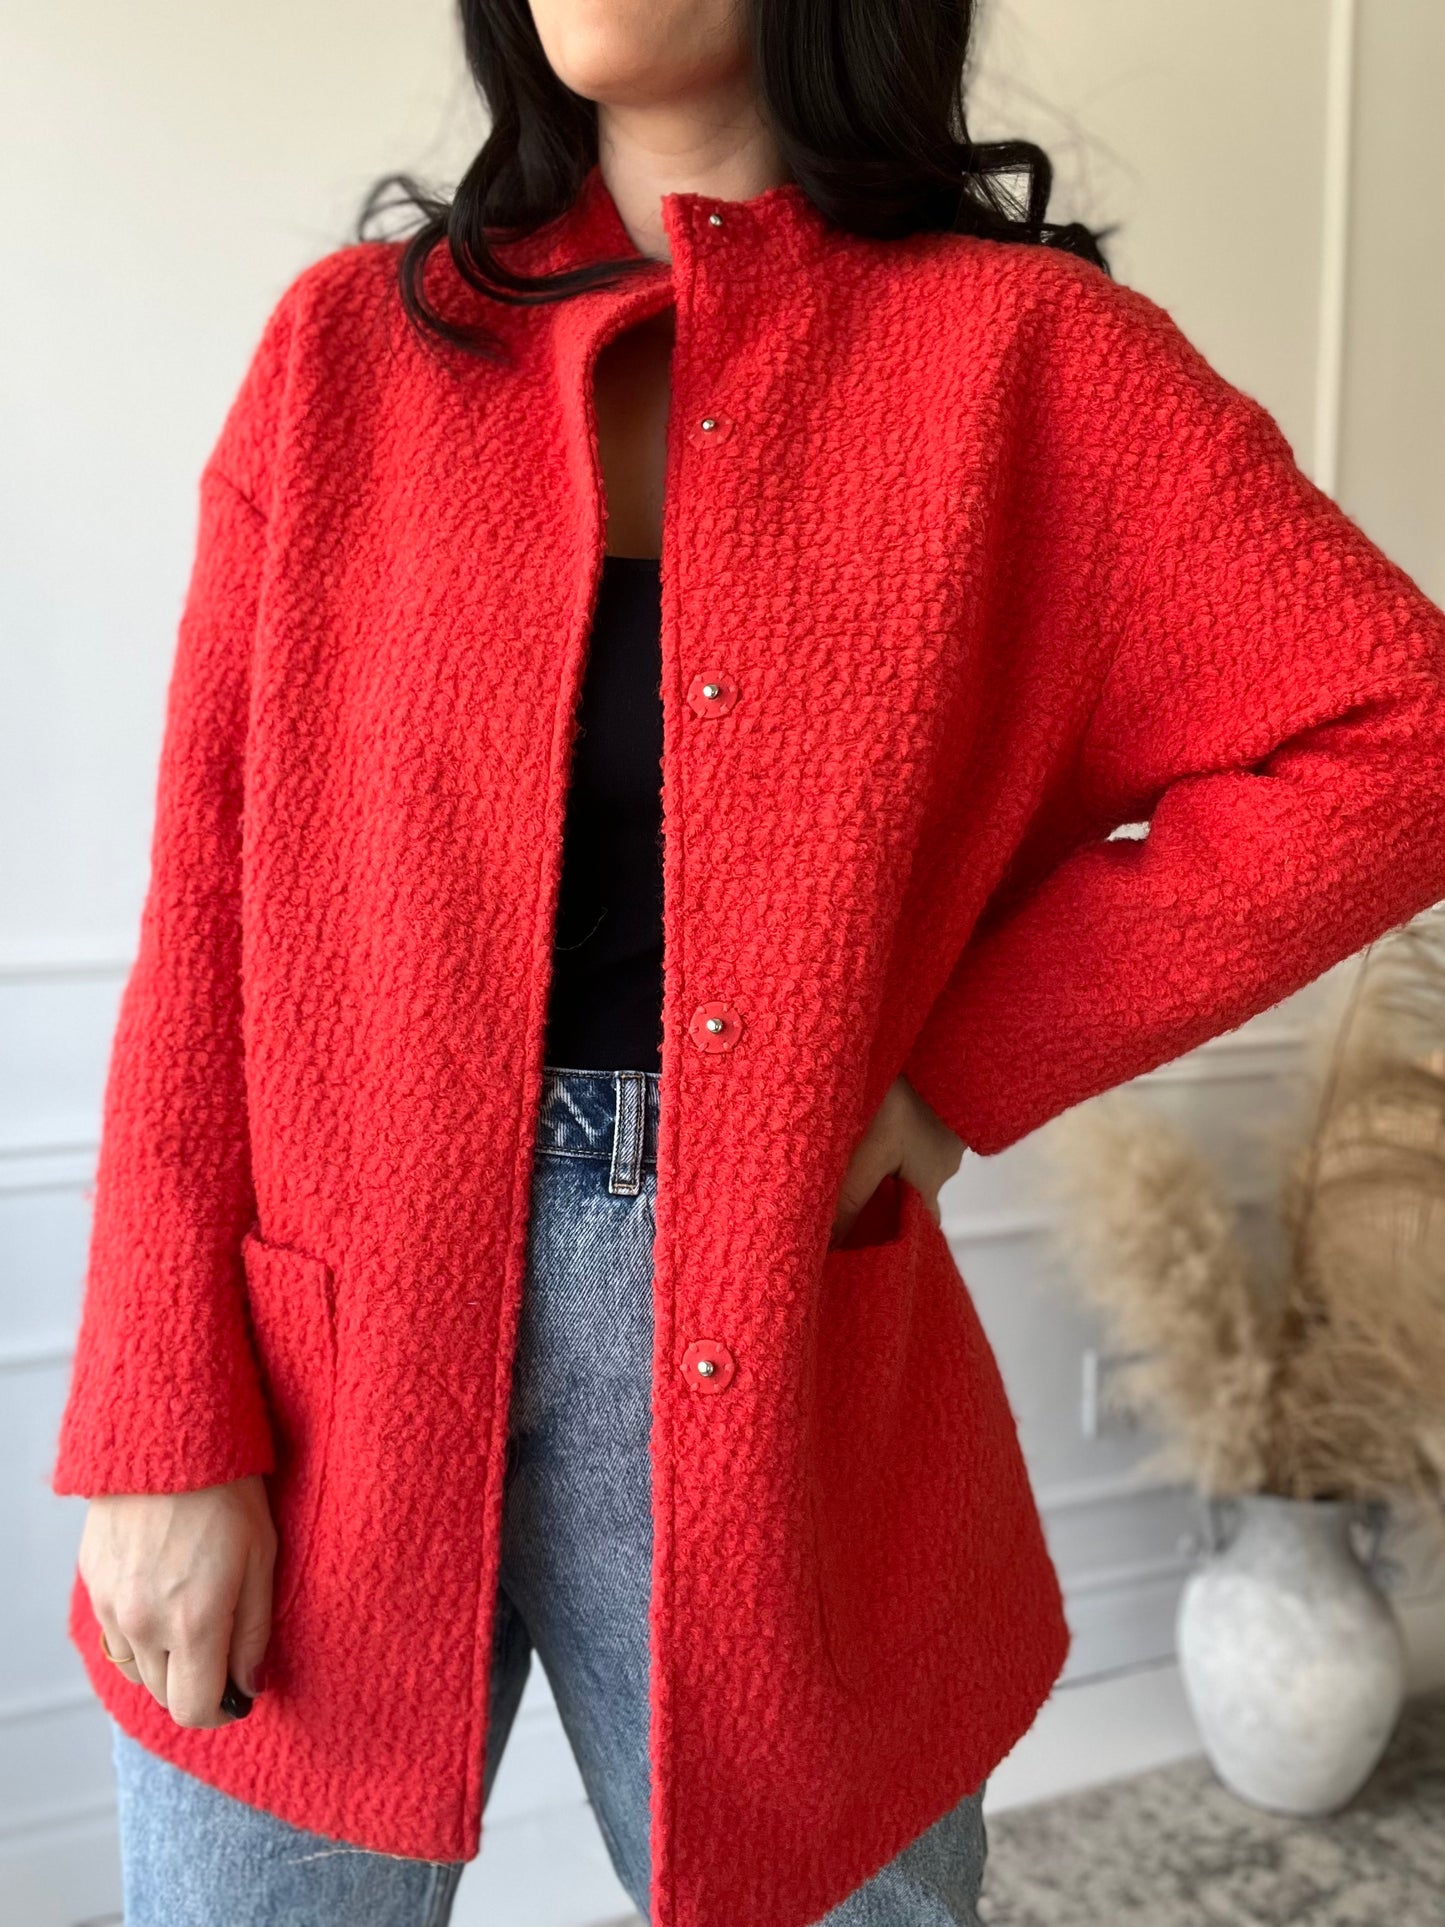 Cherry Red Texture Jacket - Size L/12